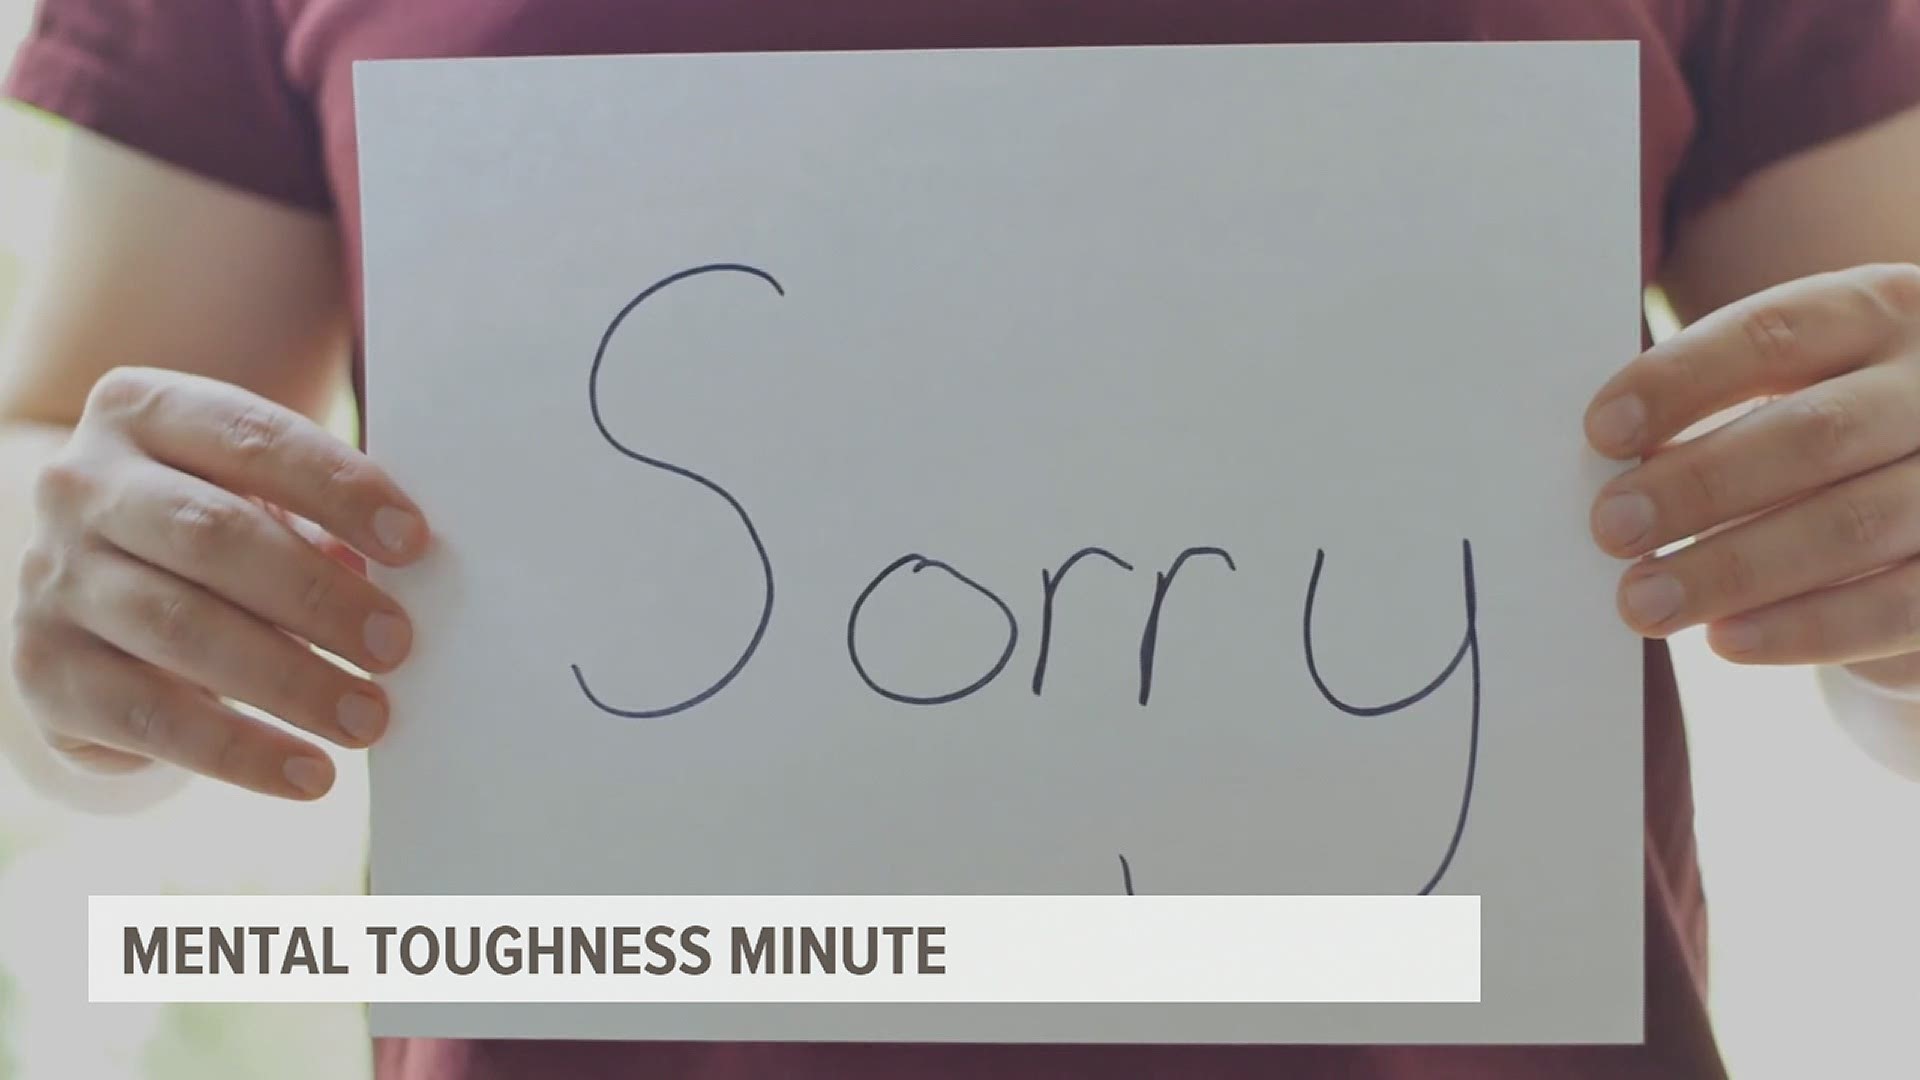 Mental Toughness expert, Eric Rittmeyer, joined FOX43 on April 9 to discuss the importance of saying you're sorry.